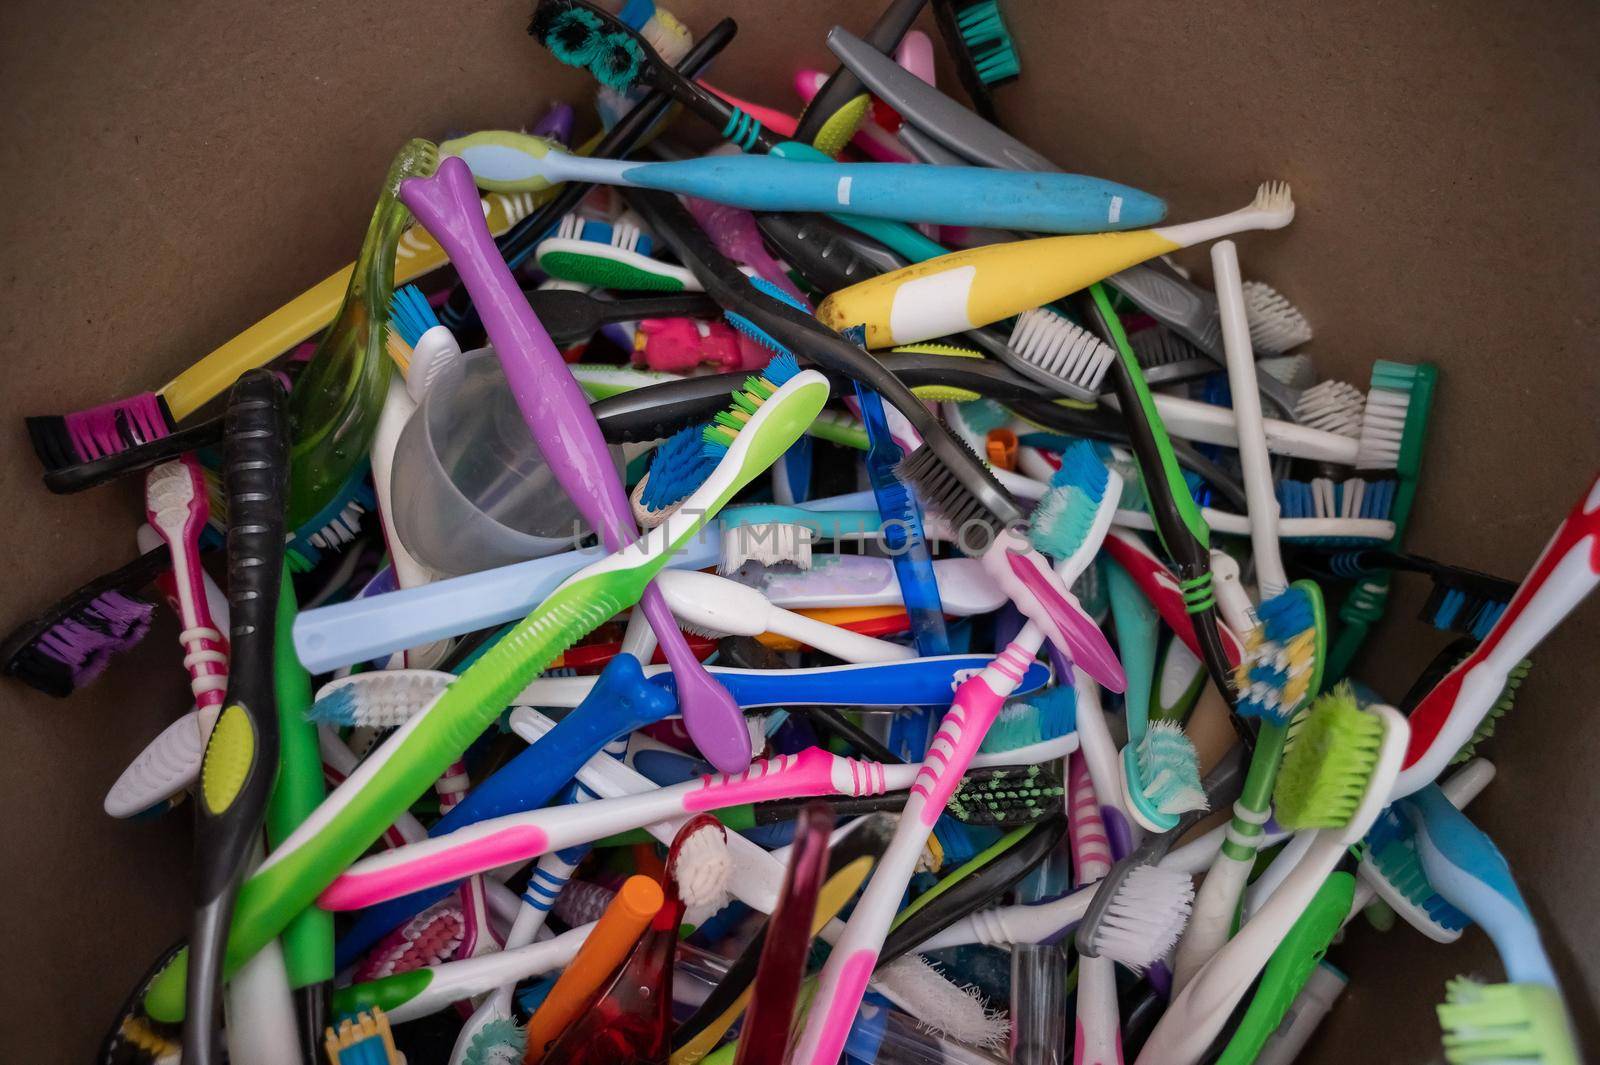 A close-up of many used plastic toothbrushes collected for recycling. by mrwed54